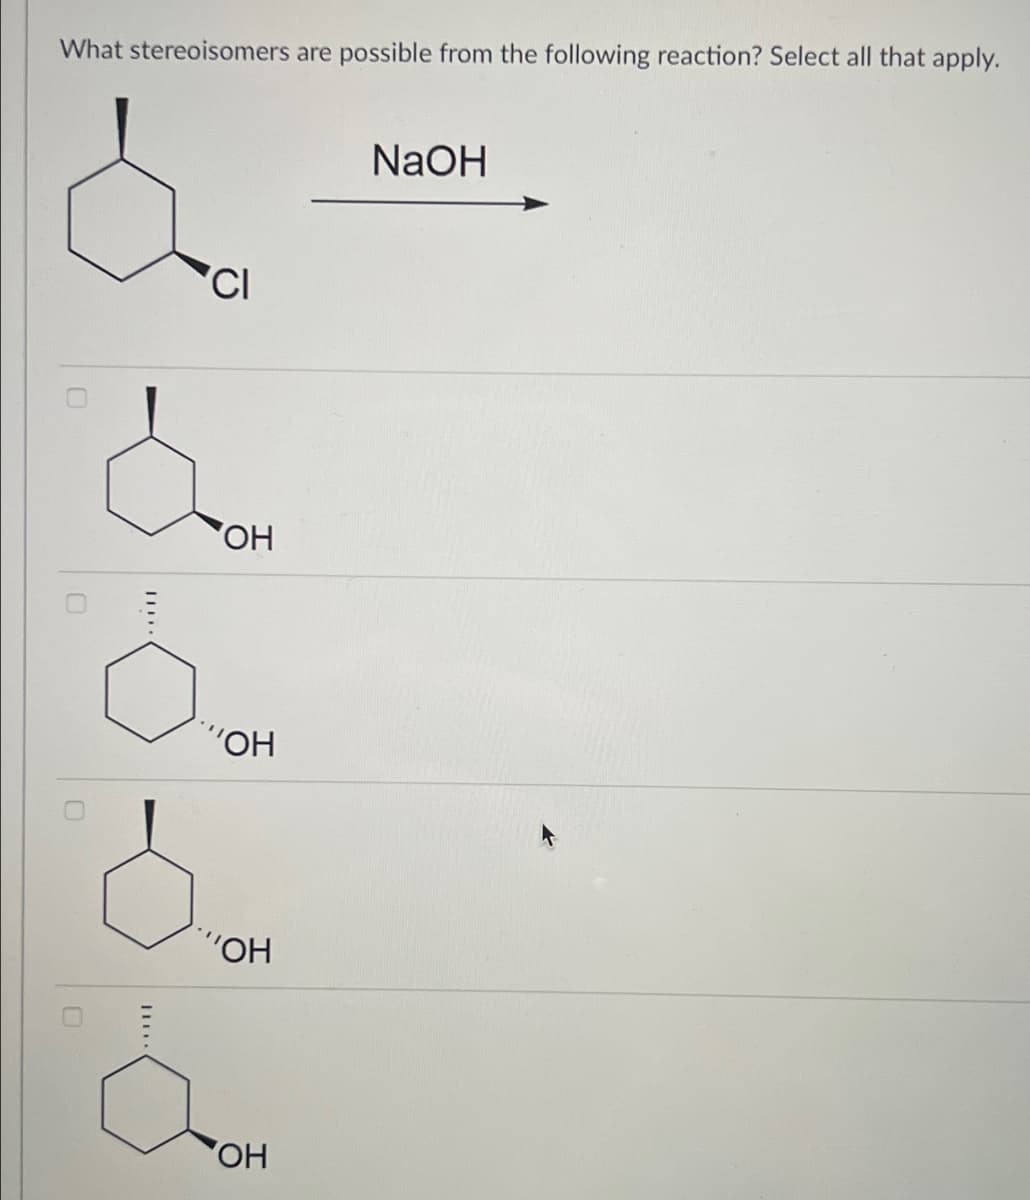 What stereoisomers are possible from the following reaction? Select all that apply.
0
0
O
II.
CI
OH
****
"OH
NaOH
"OH
OH